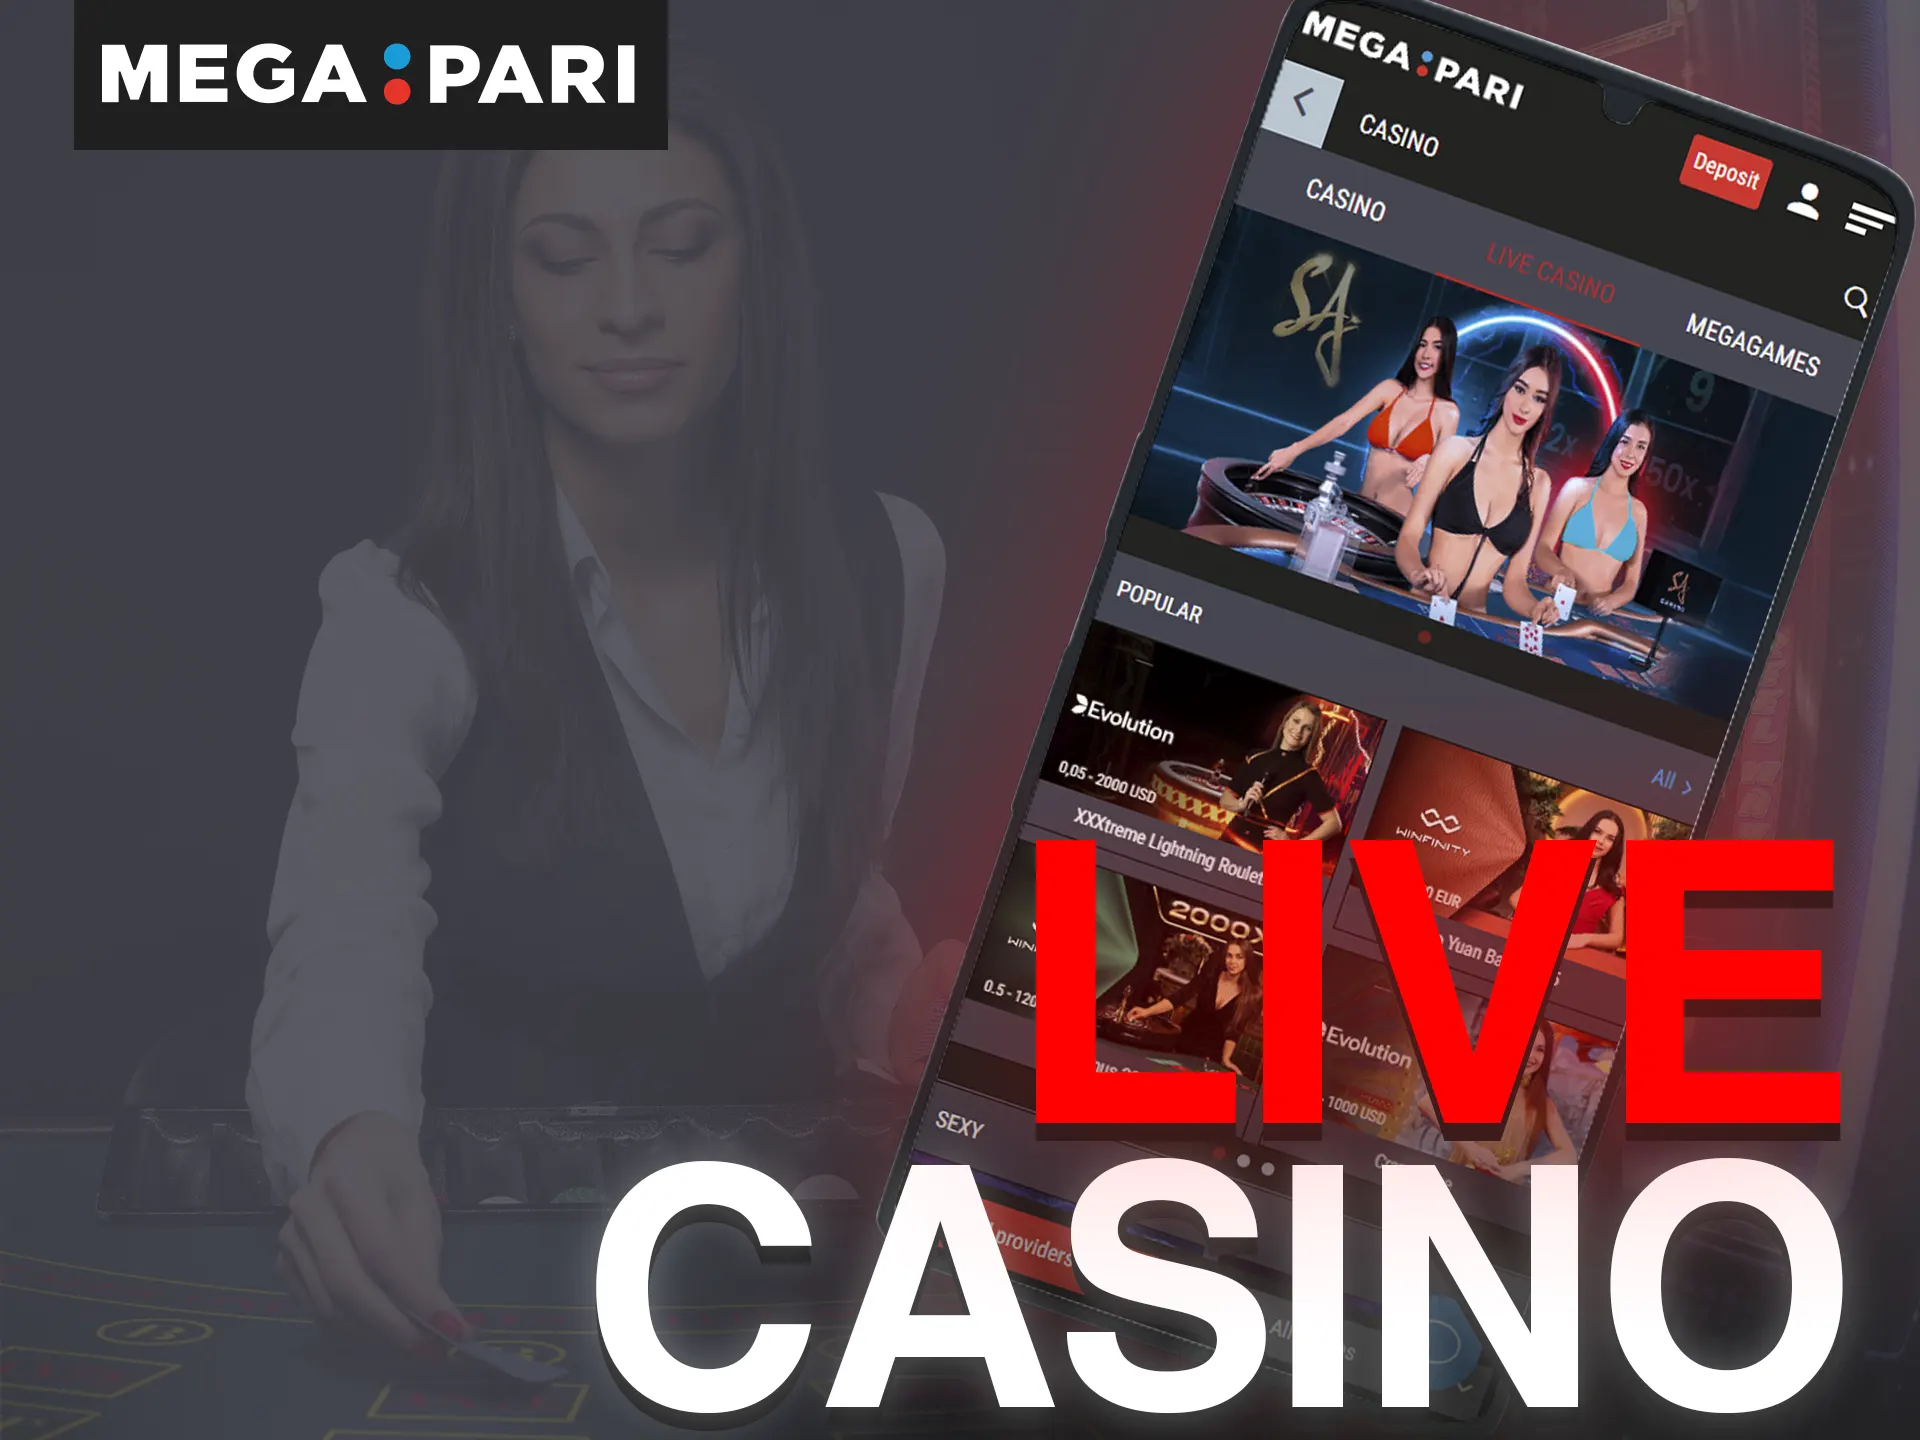 Playing in a live casino will give you a thrill.